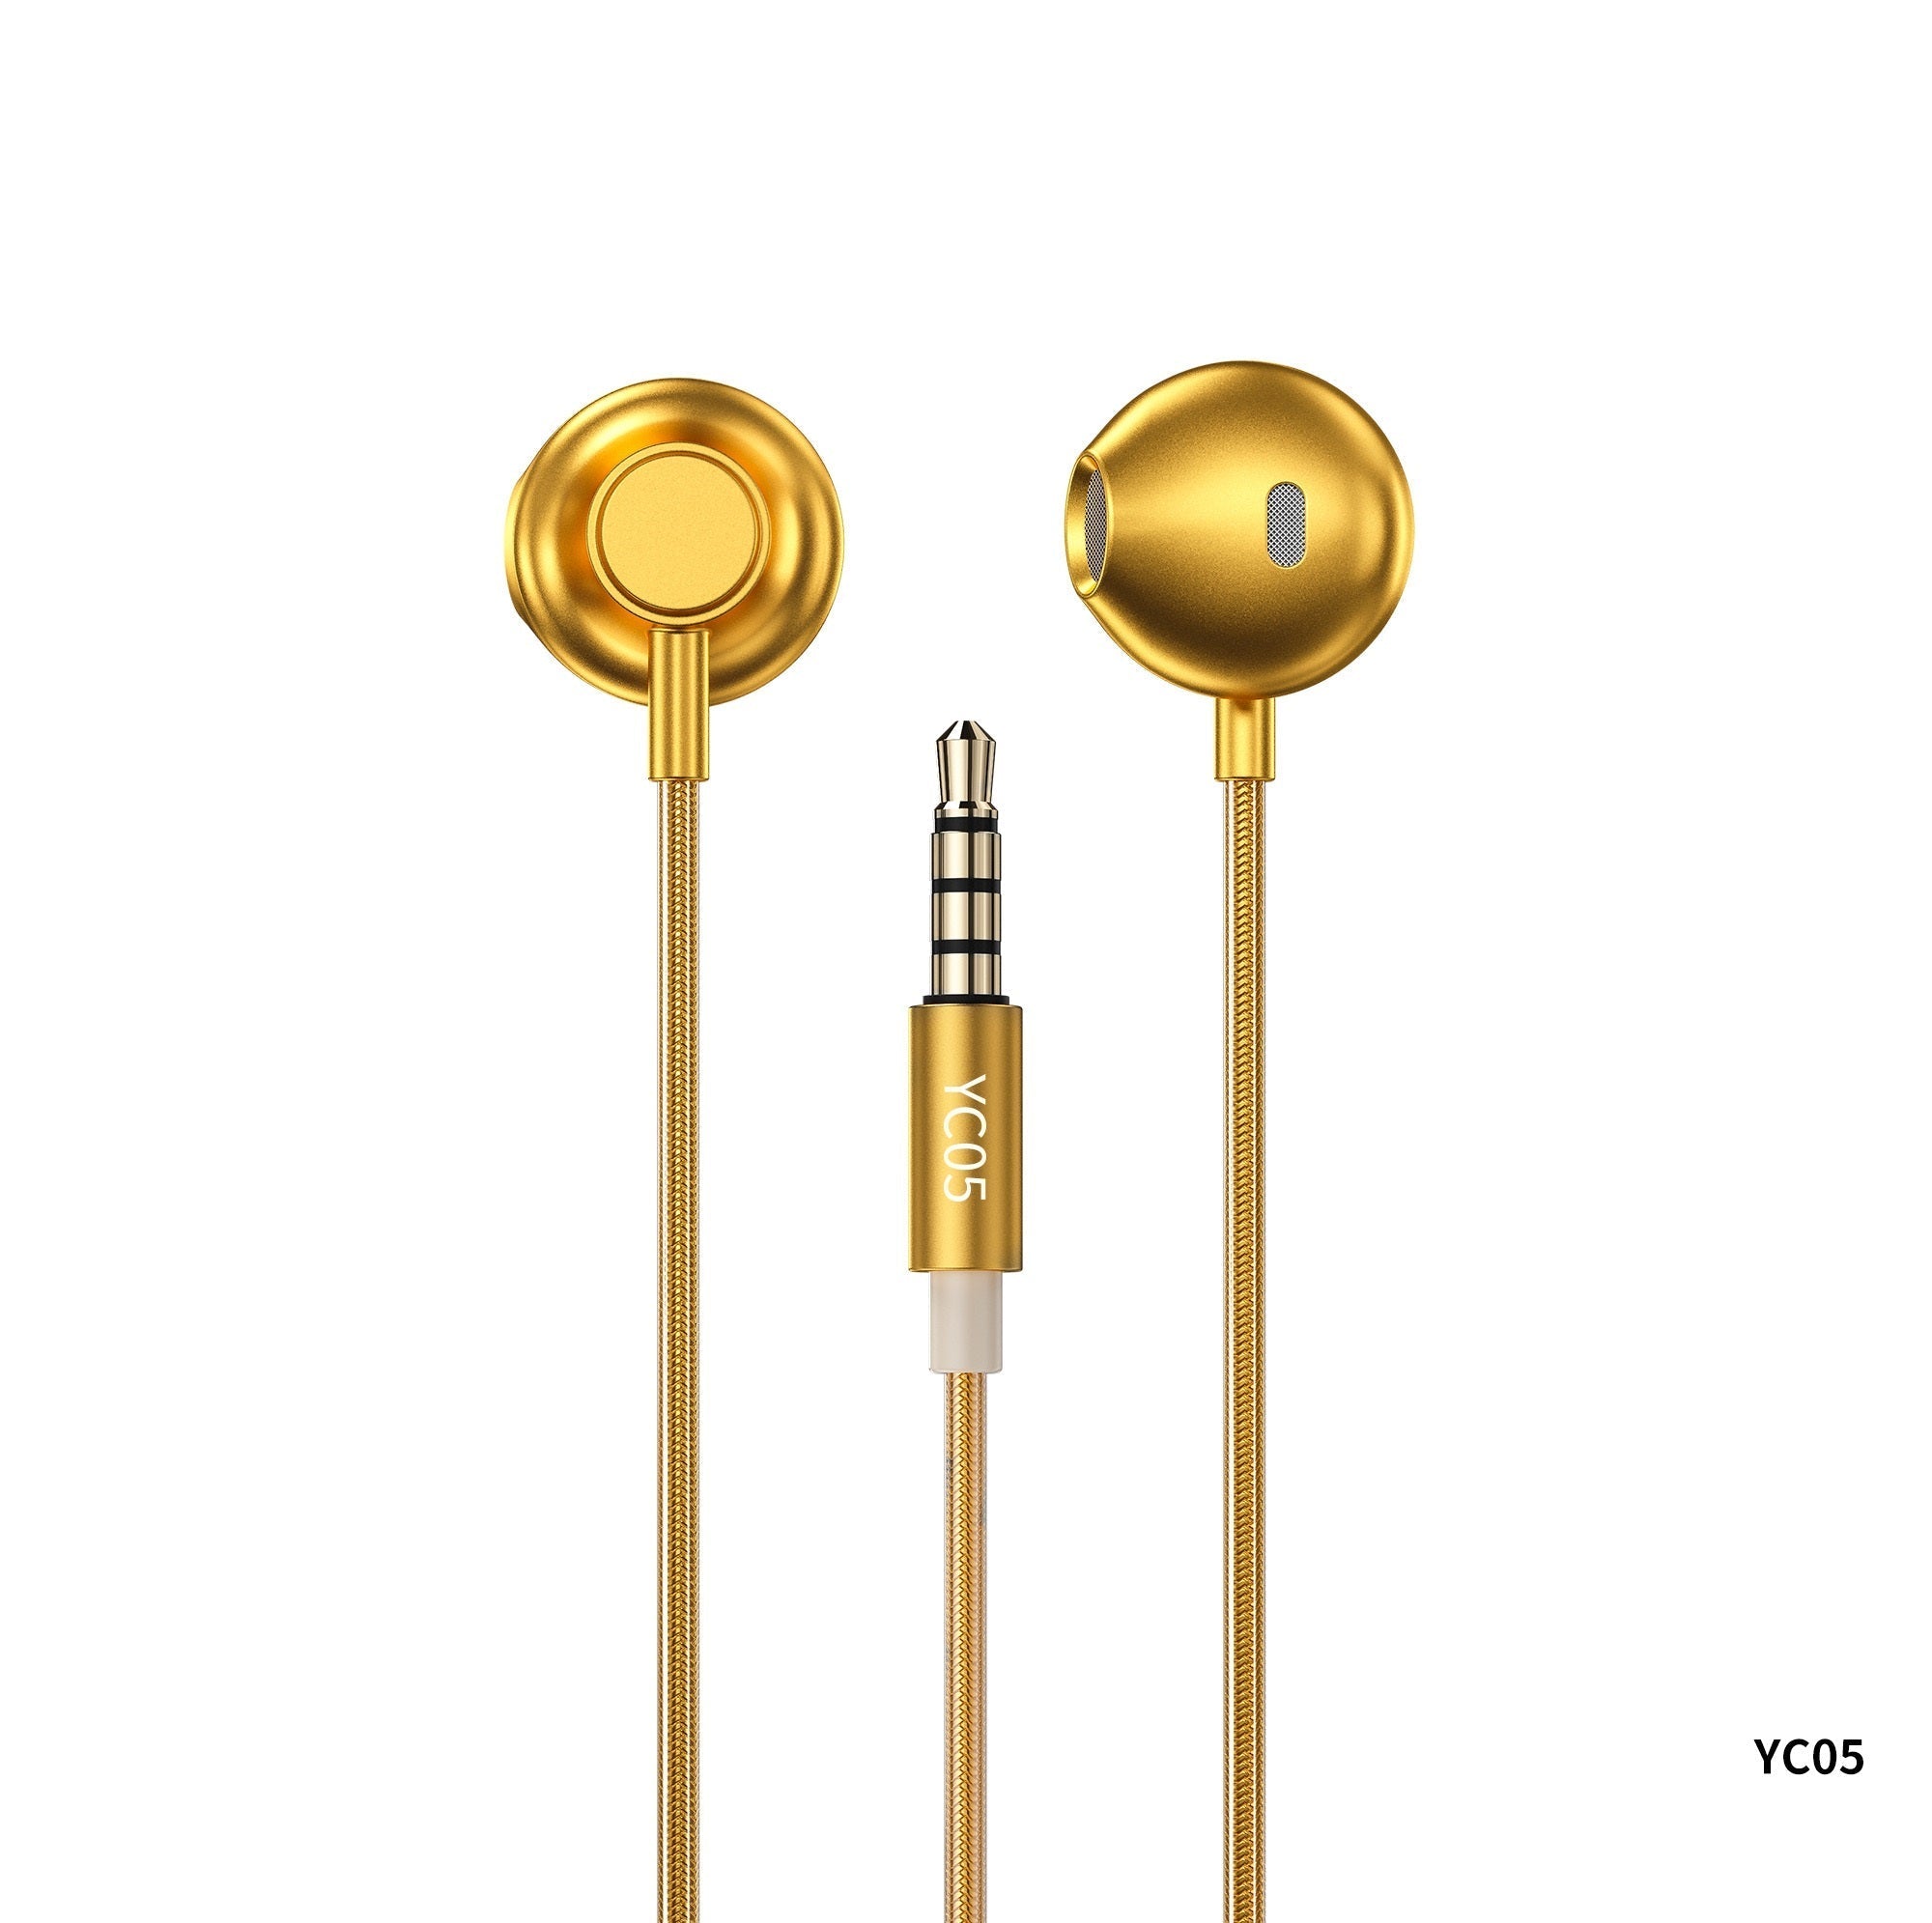 WK YC05 SAKIN/GOLDEN (3.5MM) EARPHONE FOR MISIC AND CALL, 3.5mm Earphone, Wire Earphone, AUX Earphone